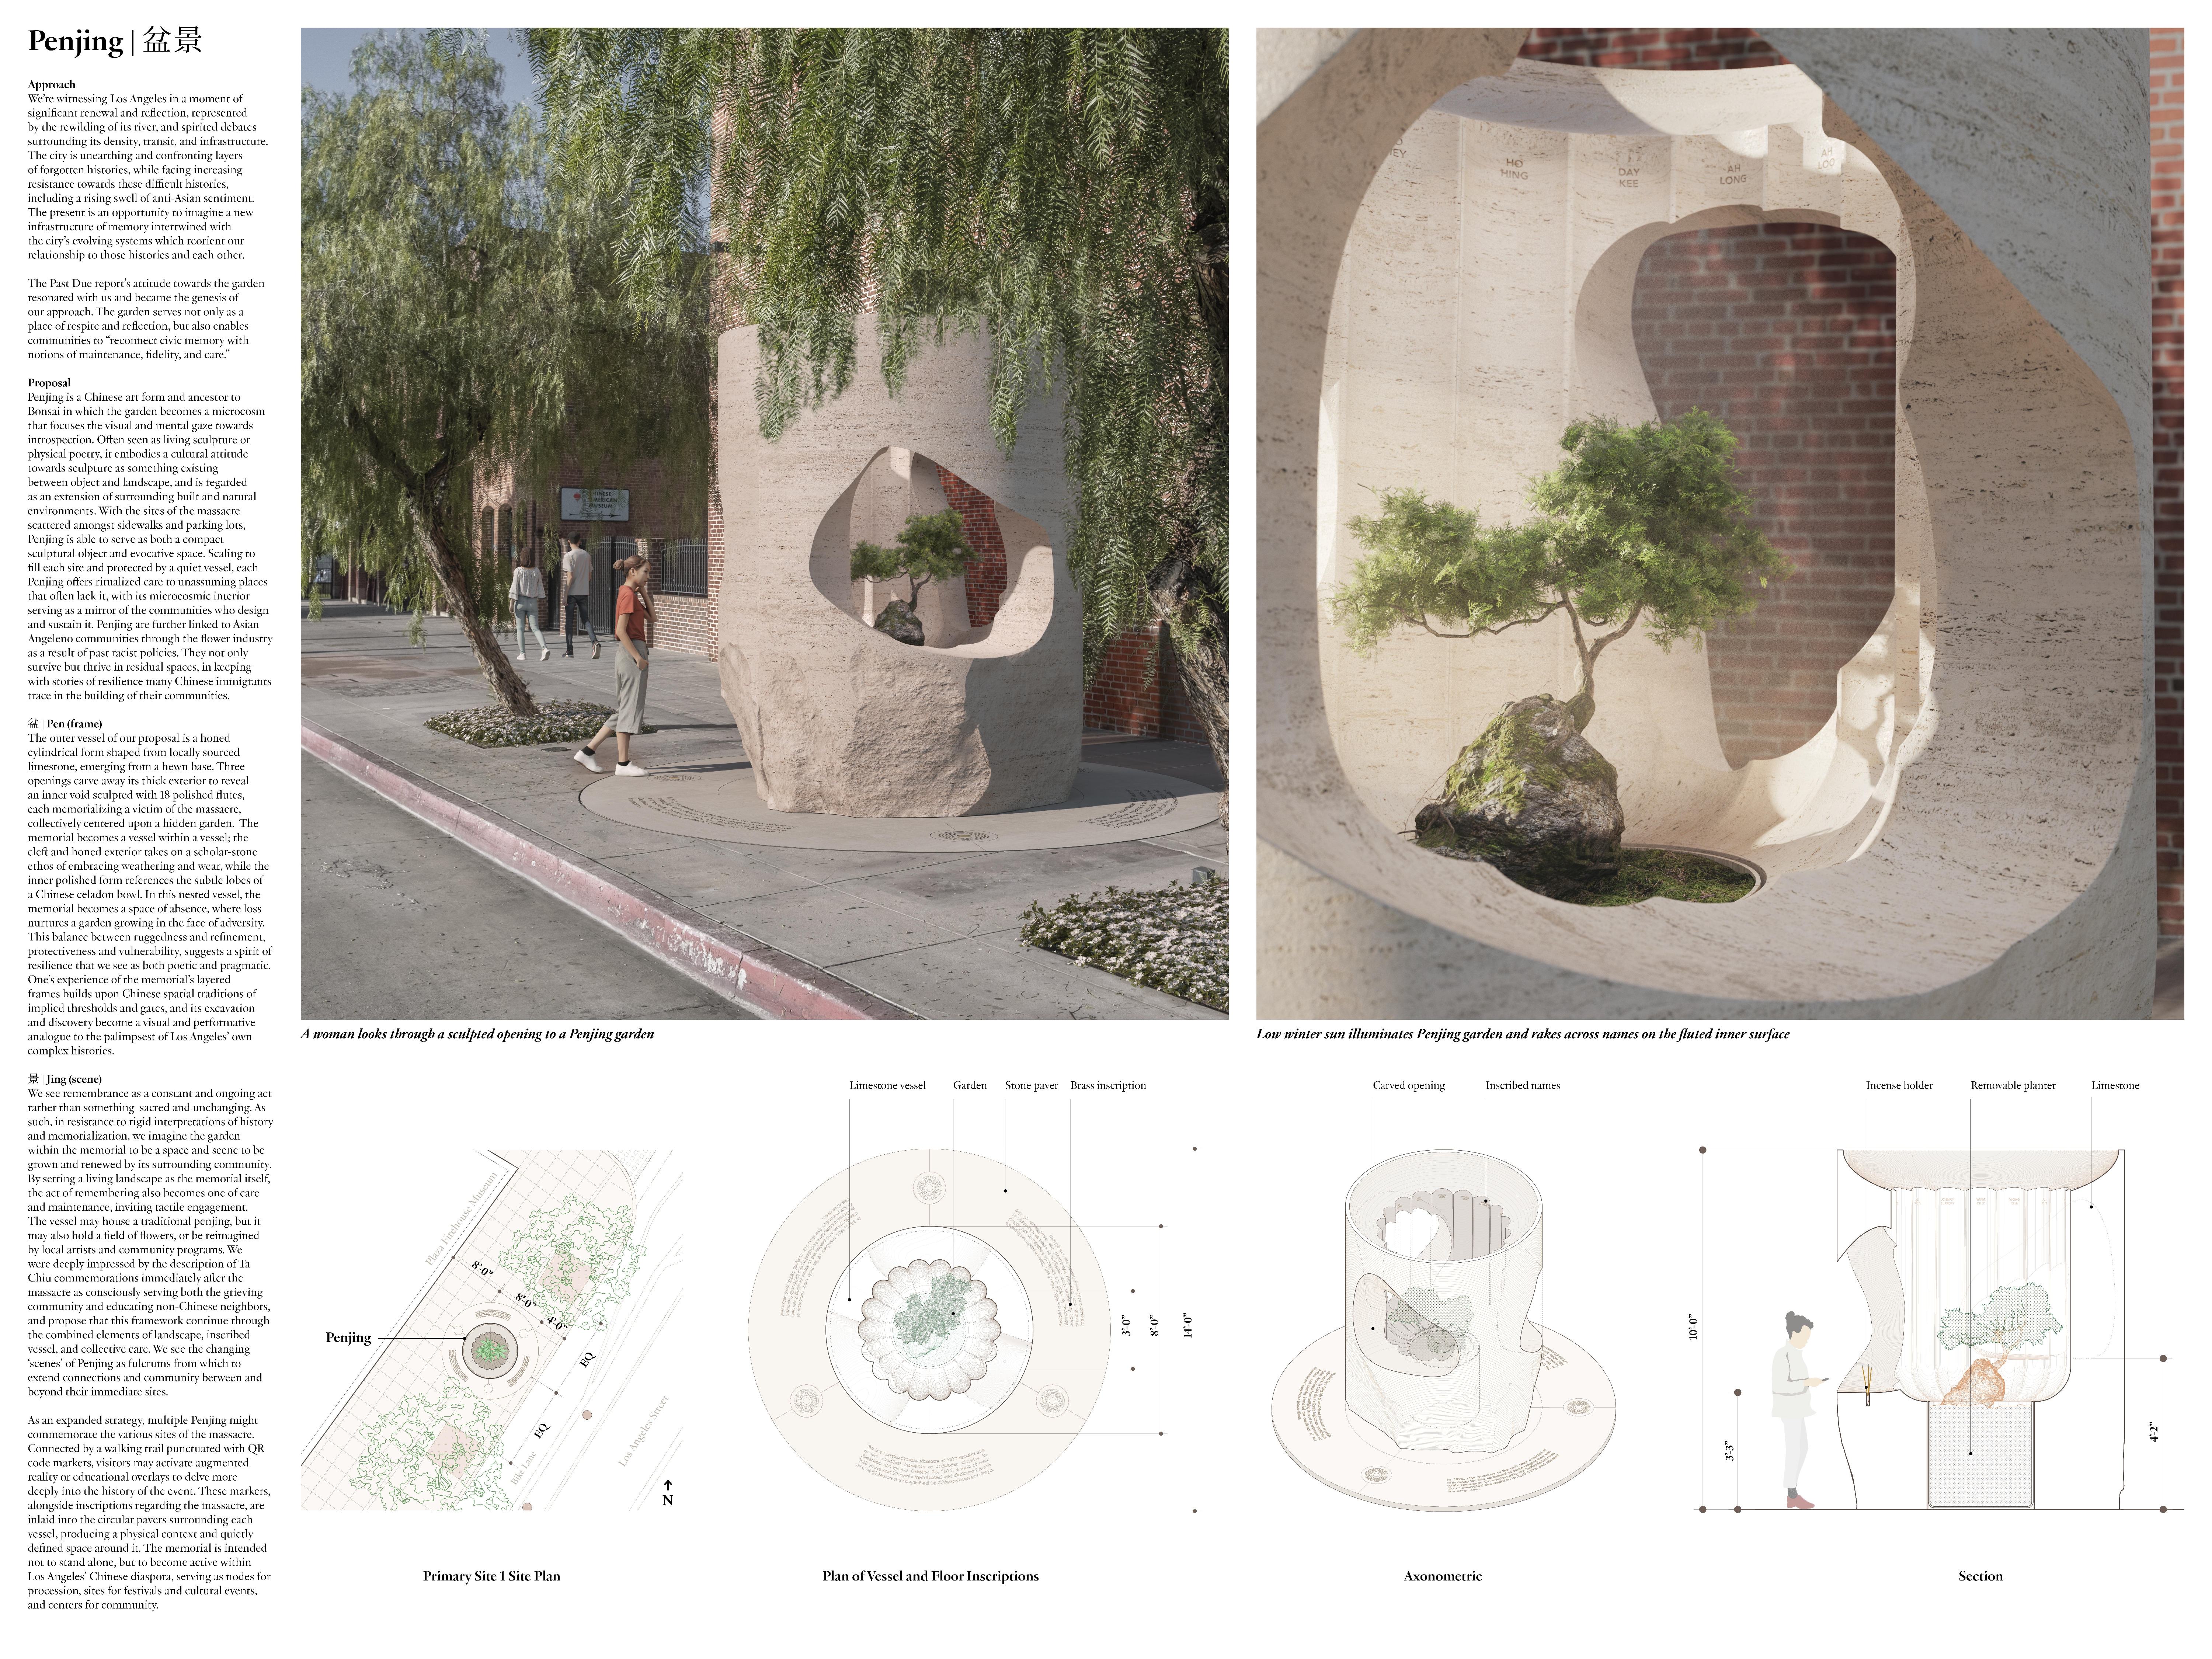 Proposed Concept of Memorial to the Victims of the 1871 Chinese Massacre. Figure x J. Jih. Architecture Collective, led by James Leng and Jennifer Ly in collaboration with J. Roc Jih, San Francisco, CA